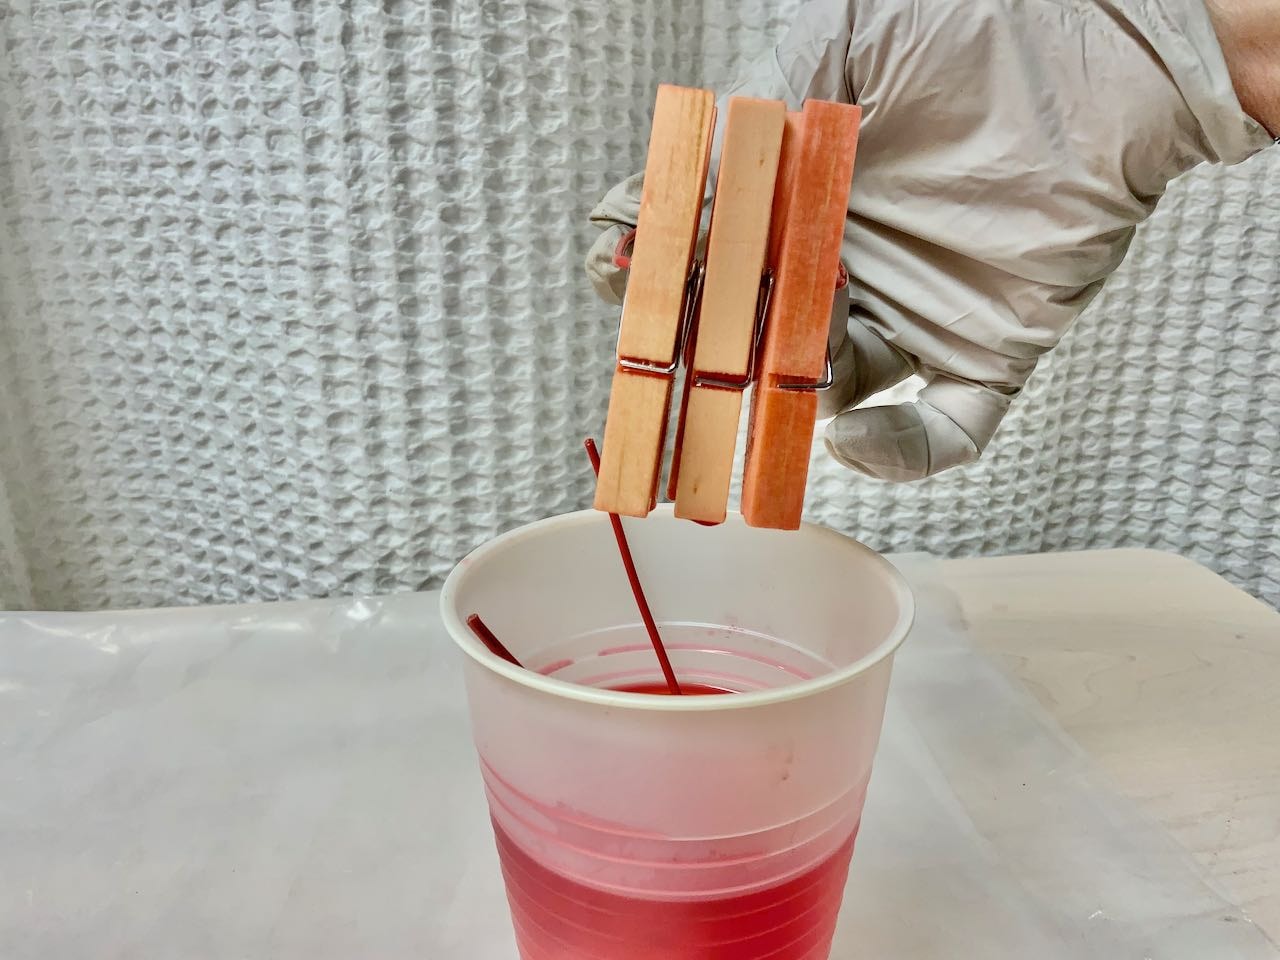 Gloved hand holding a set of three clothespins over the cup of dye, letting the dye drip off